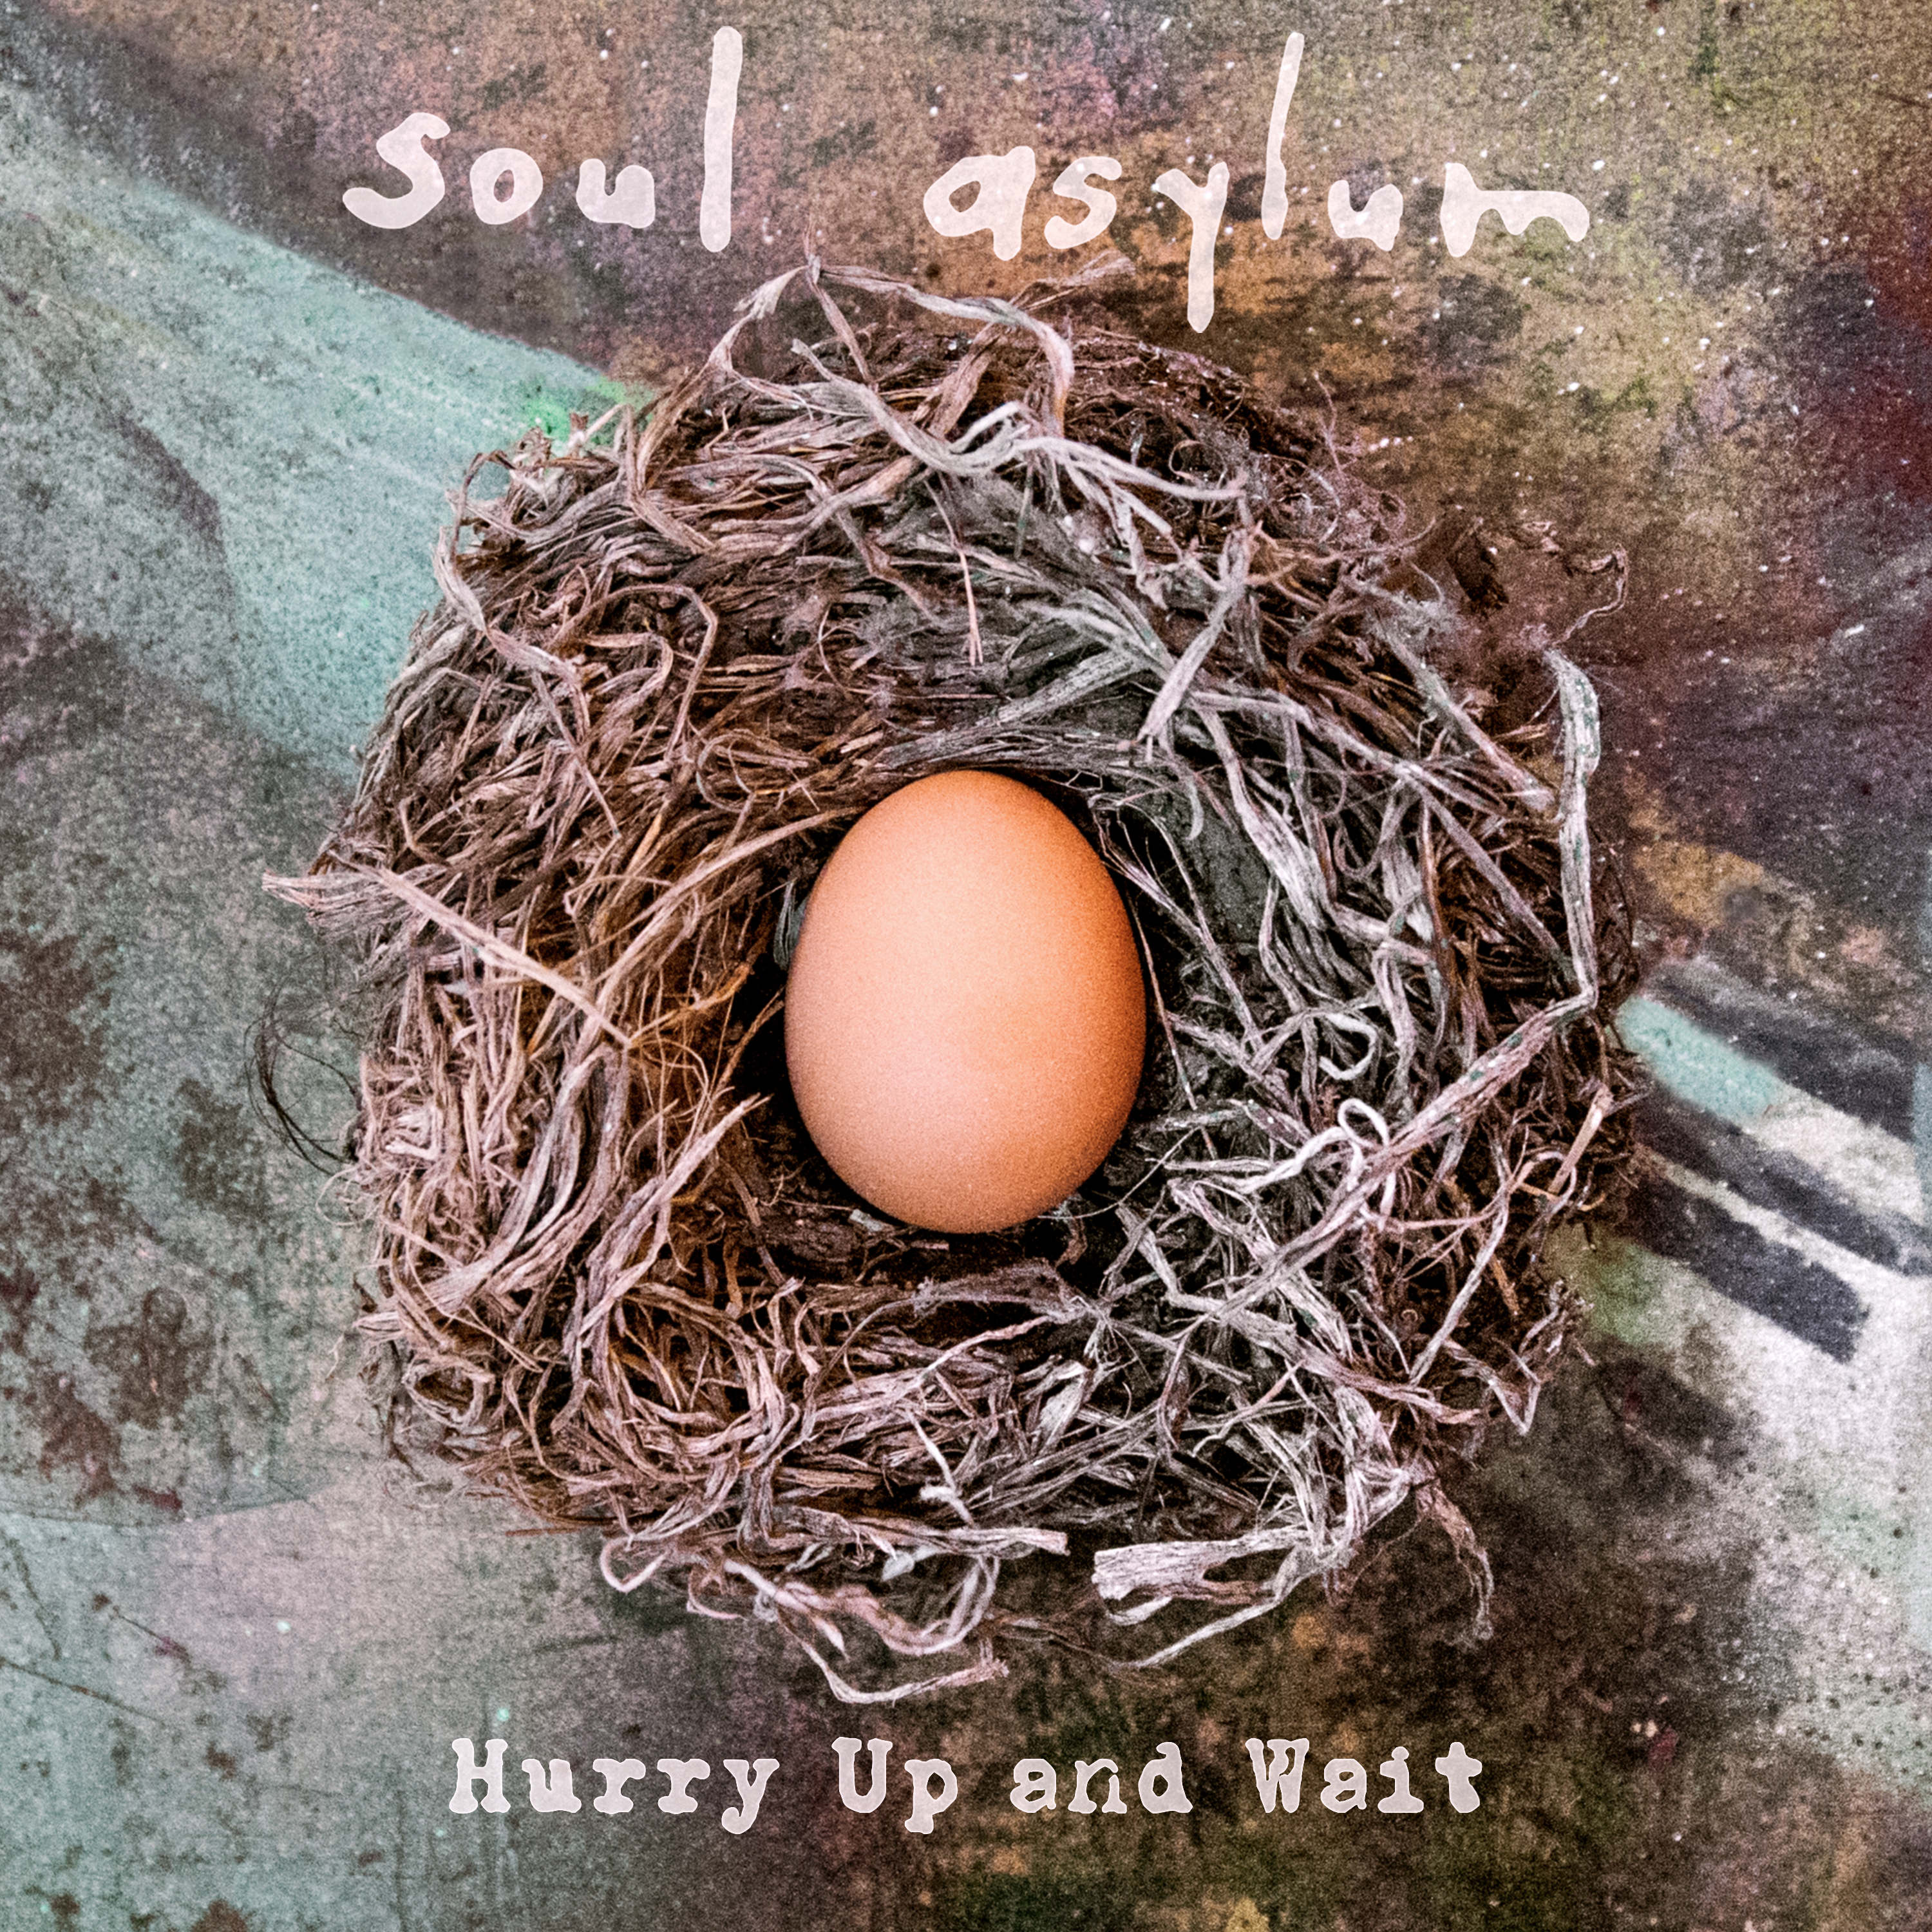 SOUL ASYLUM Announce Record Store Day Release - New Song "Social Butterfly" out Today!